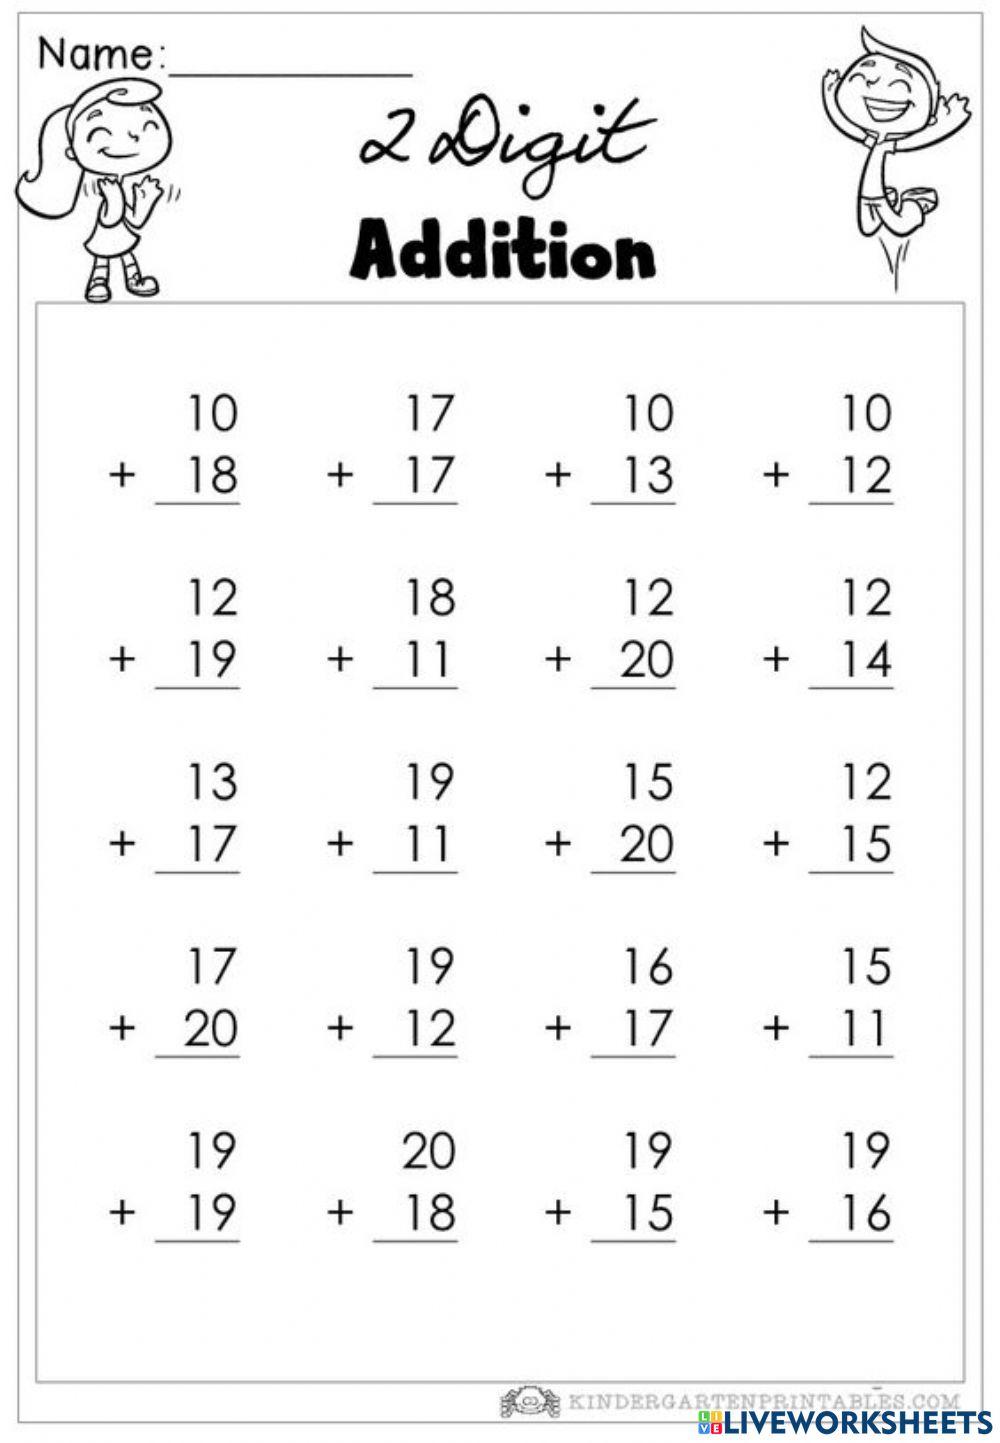 Math - Two digit addition with regrouping